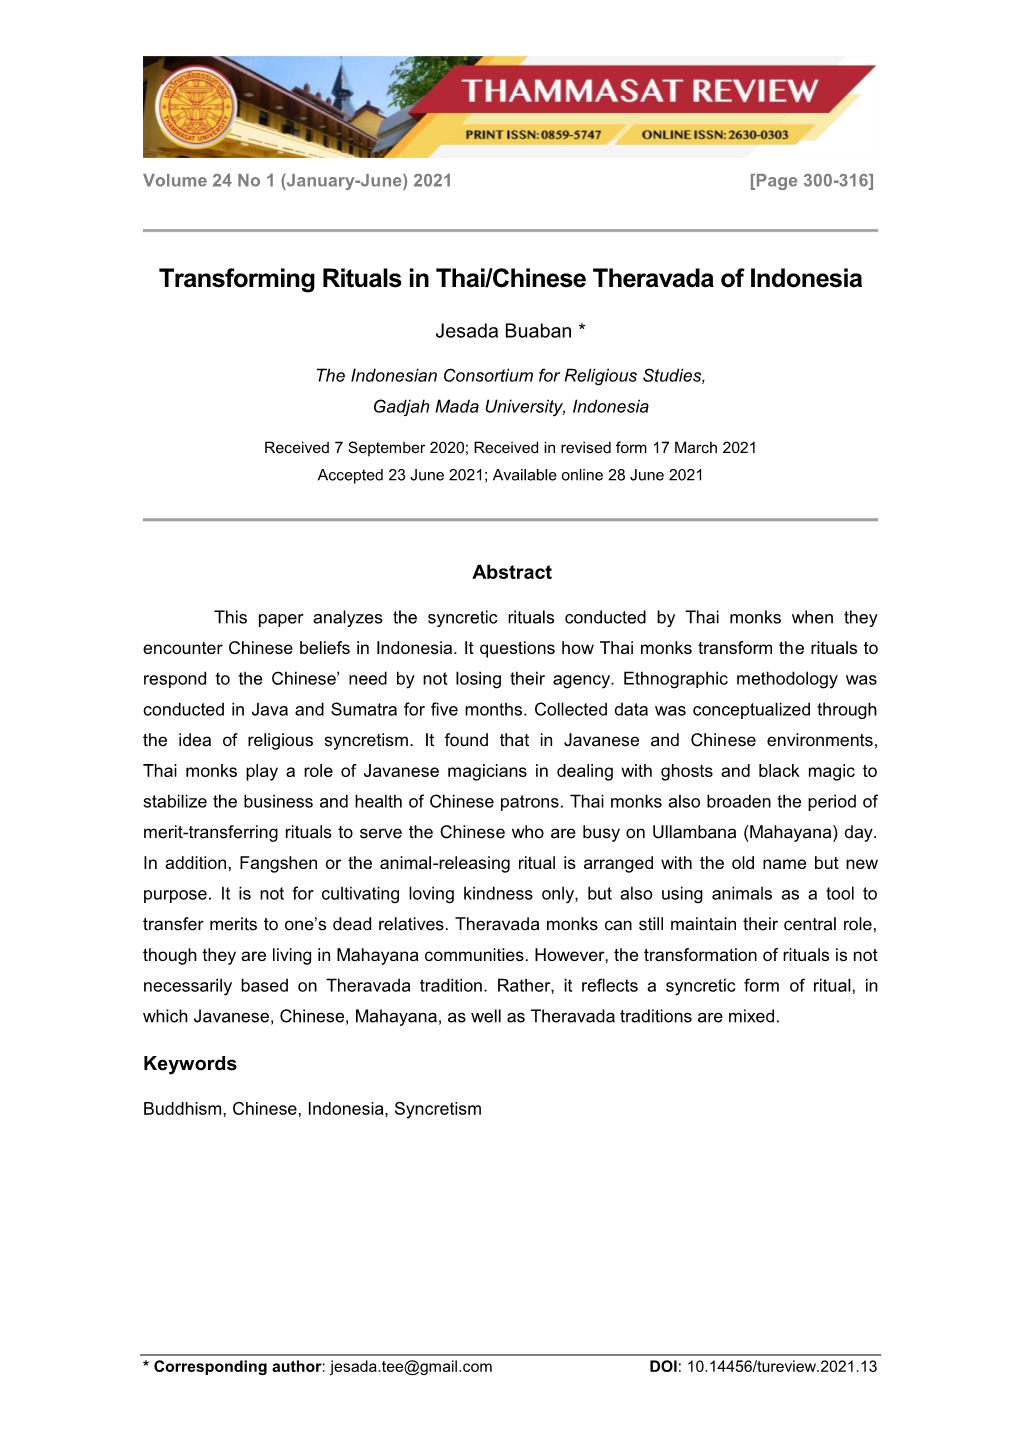 Transforming Rituals in Thai/Chinese Theravada of Indonesia